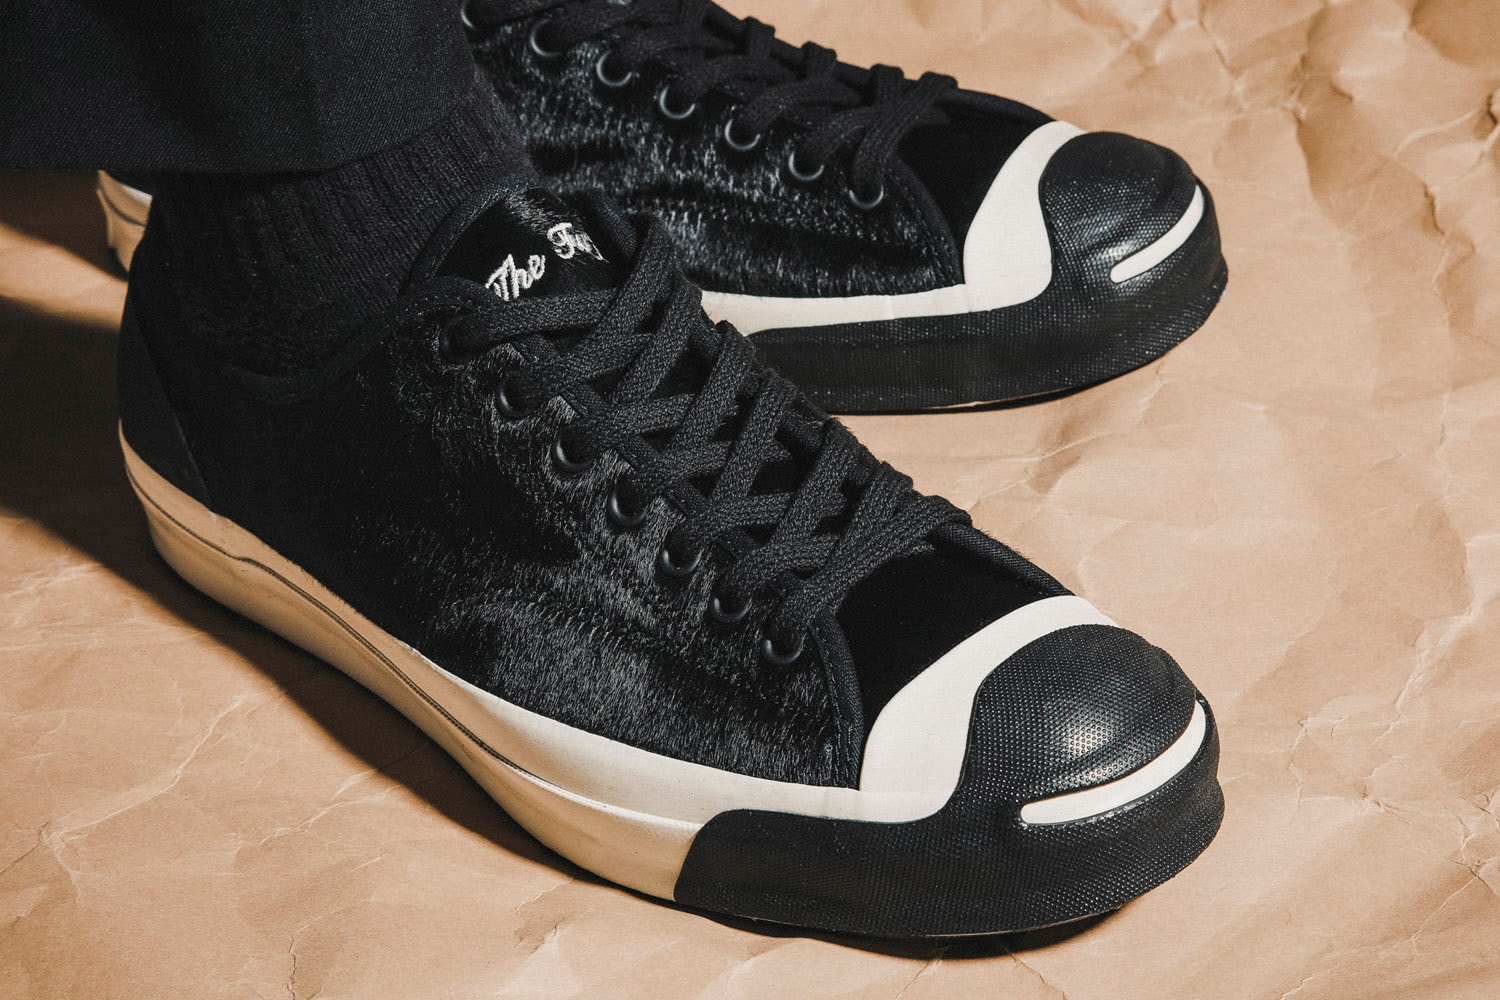 BornxRaised x Converse Jack Purcell Pack On Feet | Hypebeast